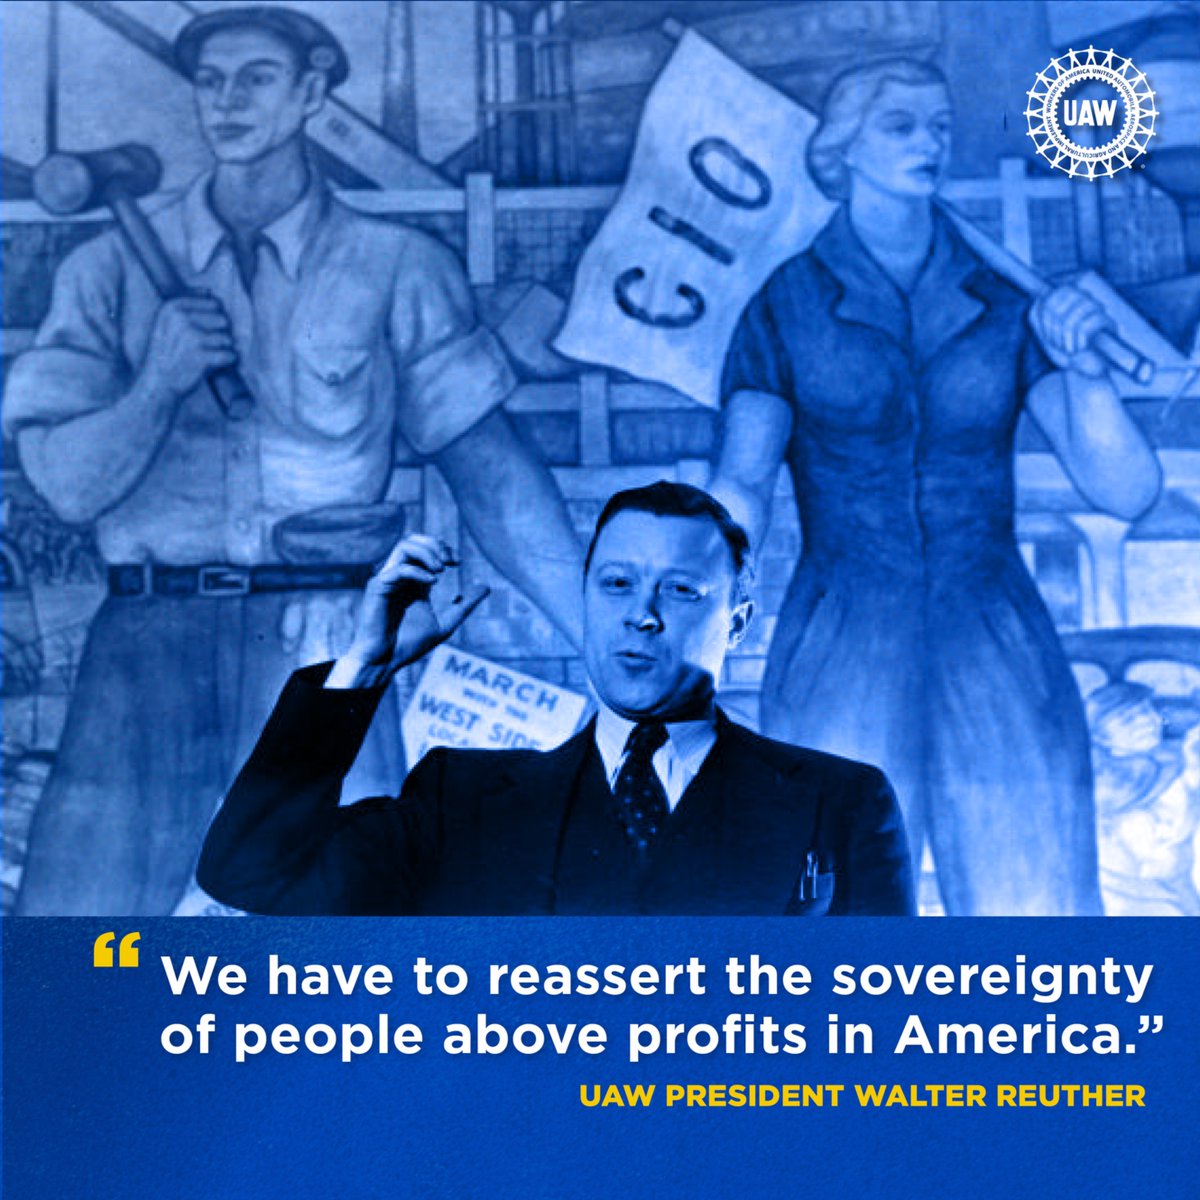 'We have to reassert the sovereignty of people above profits in America.” — Walter Reuther, President, UAW International at the opening address of the 12th UAW constitutional convention in Milwaukee, Wisconsin, July 10, 1949. #StandUpUAW